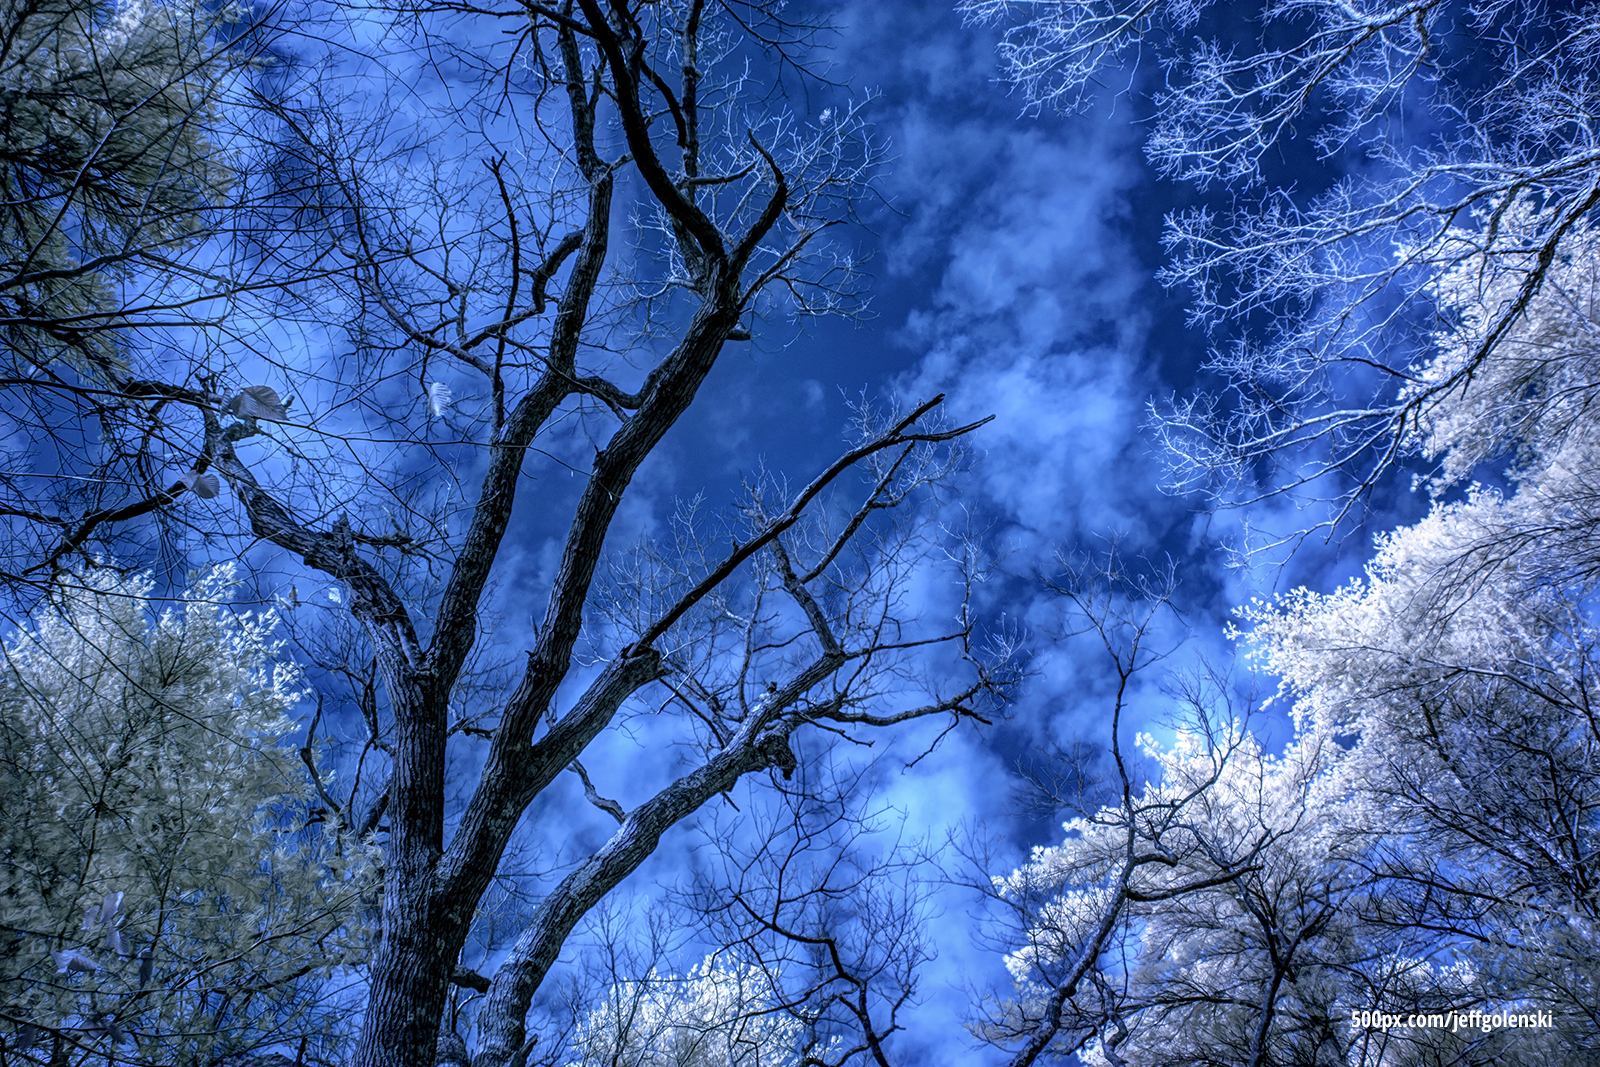 Infrared Photo. Freetown State Forest, Fall River, Massachusetts